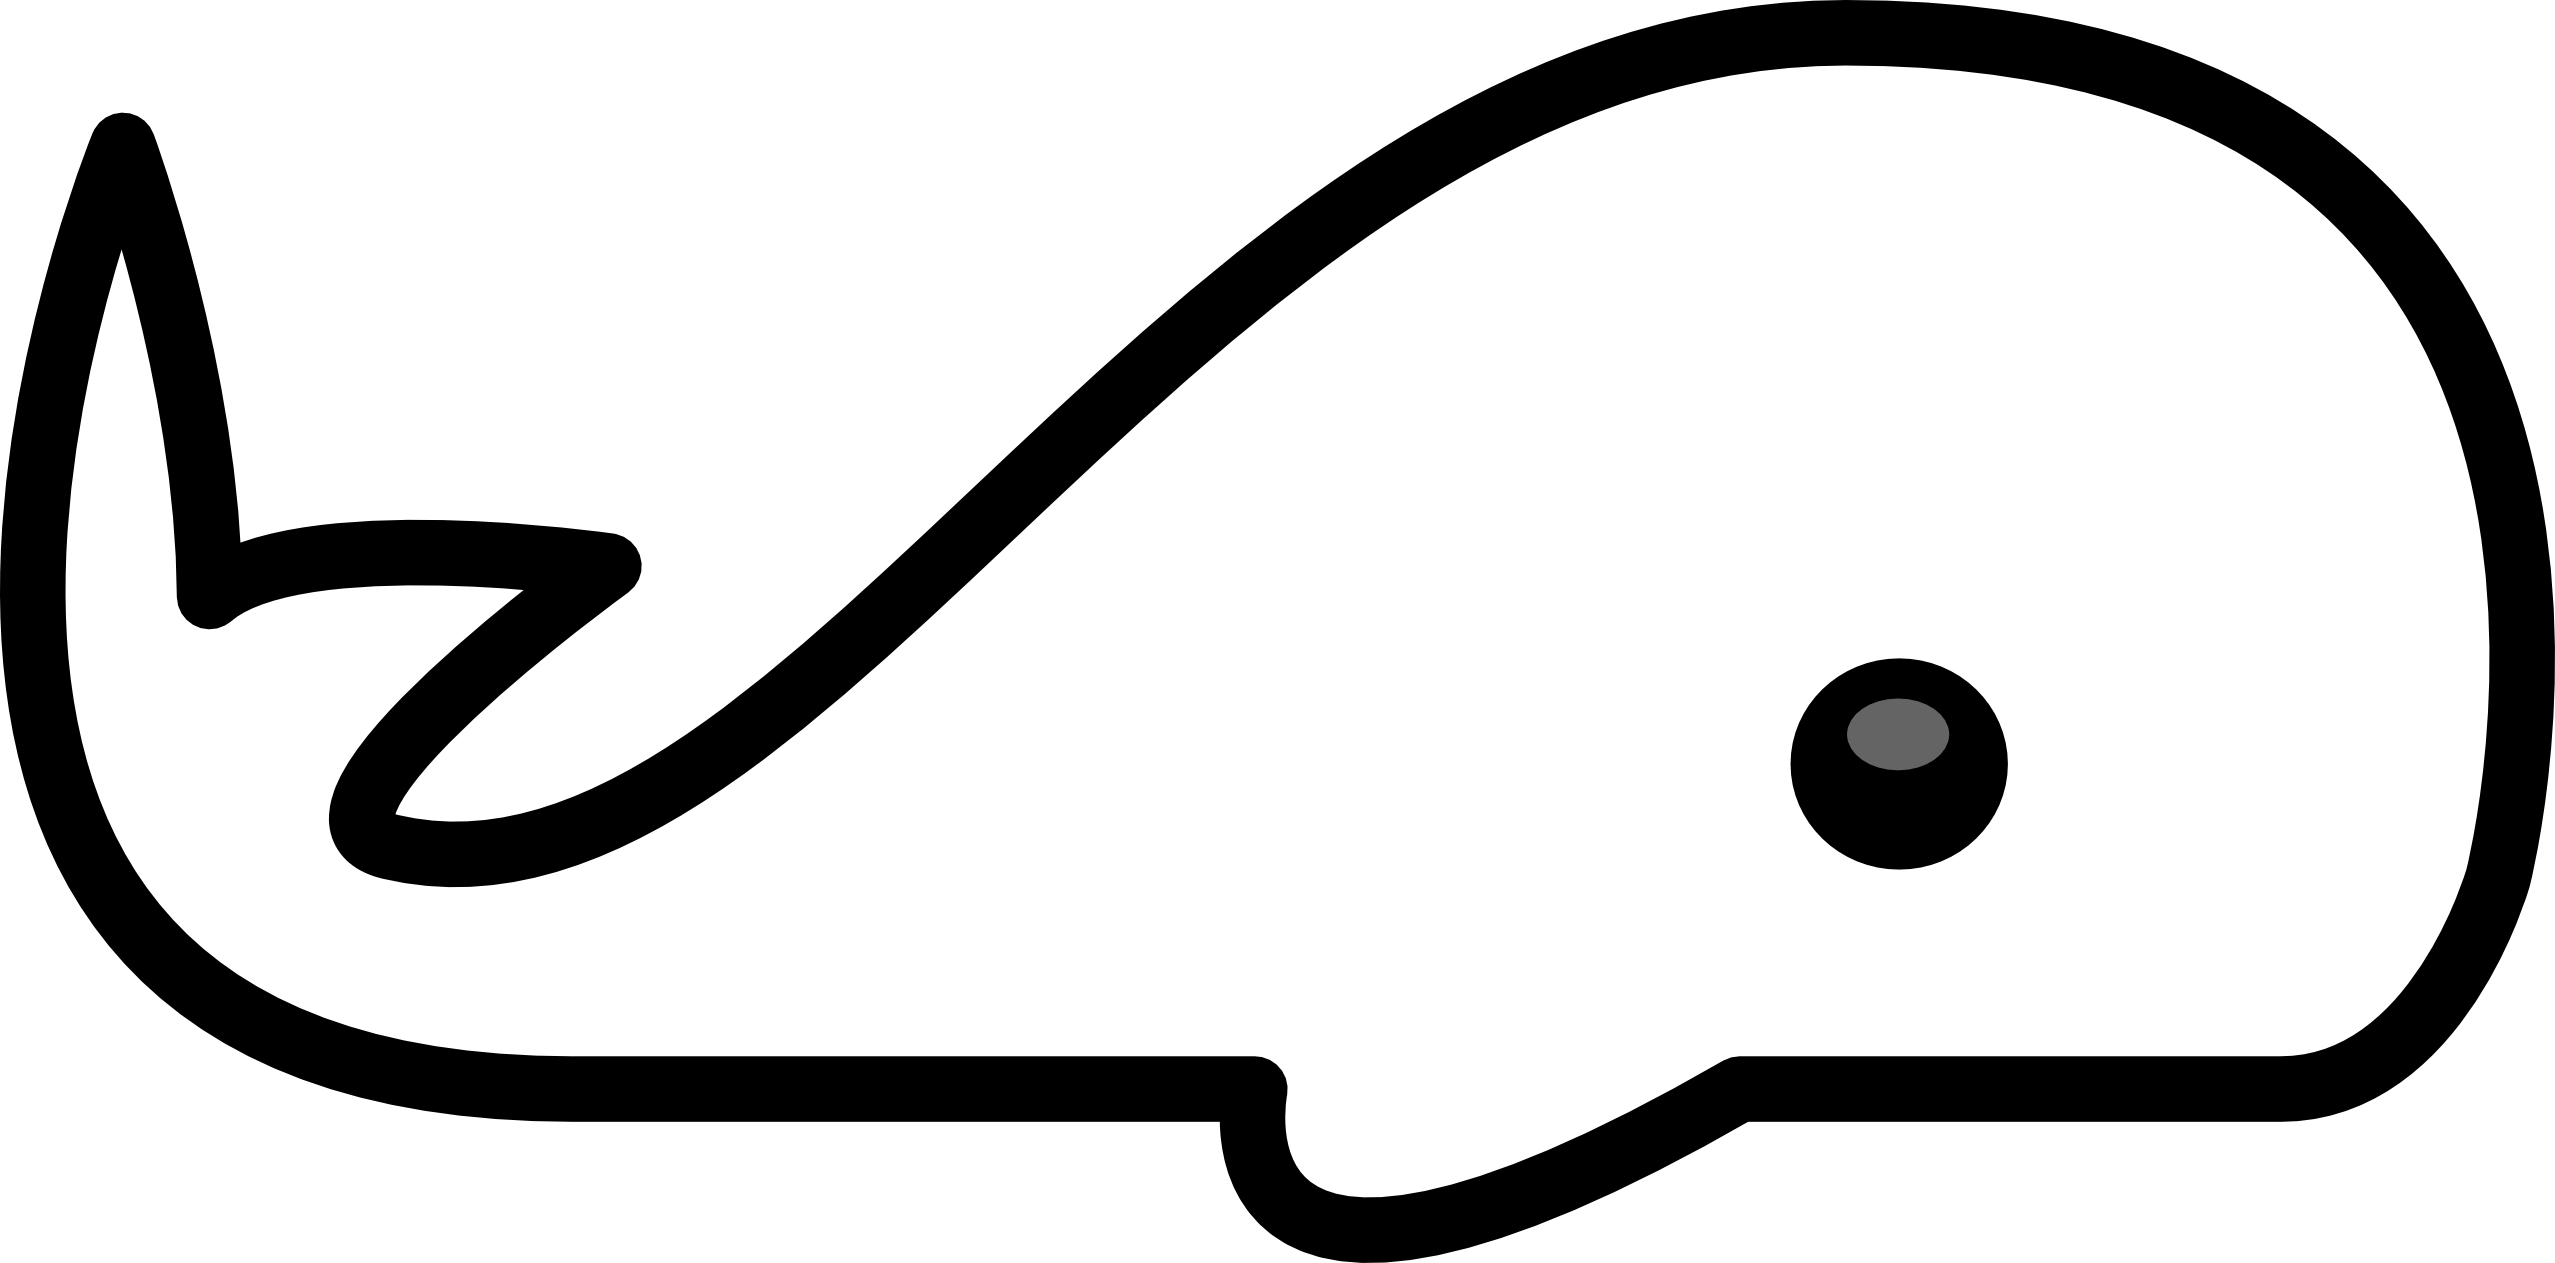 Pix For > Whale Clipart Black And White